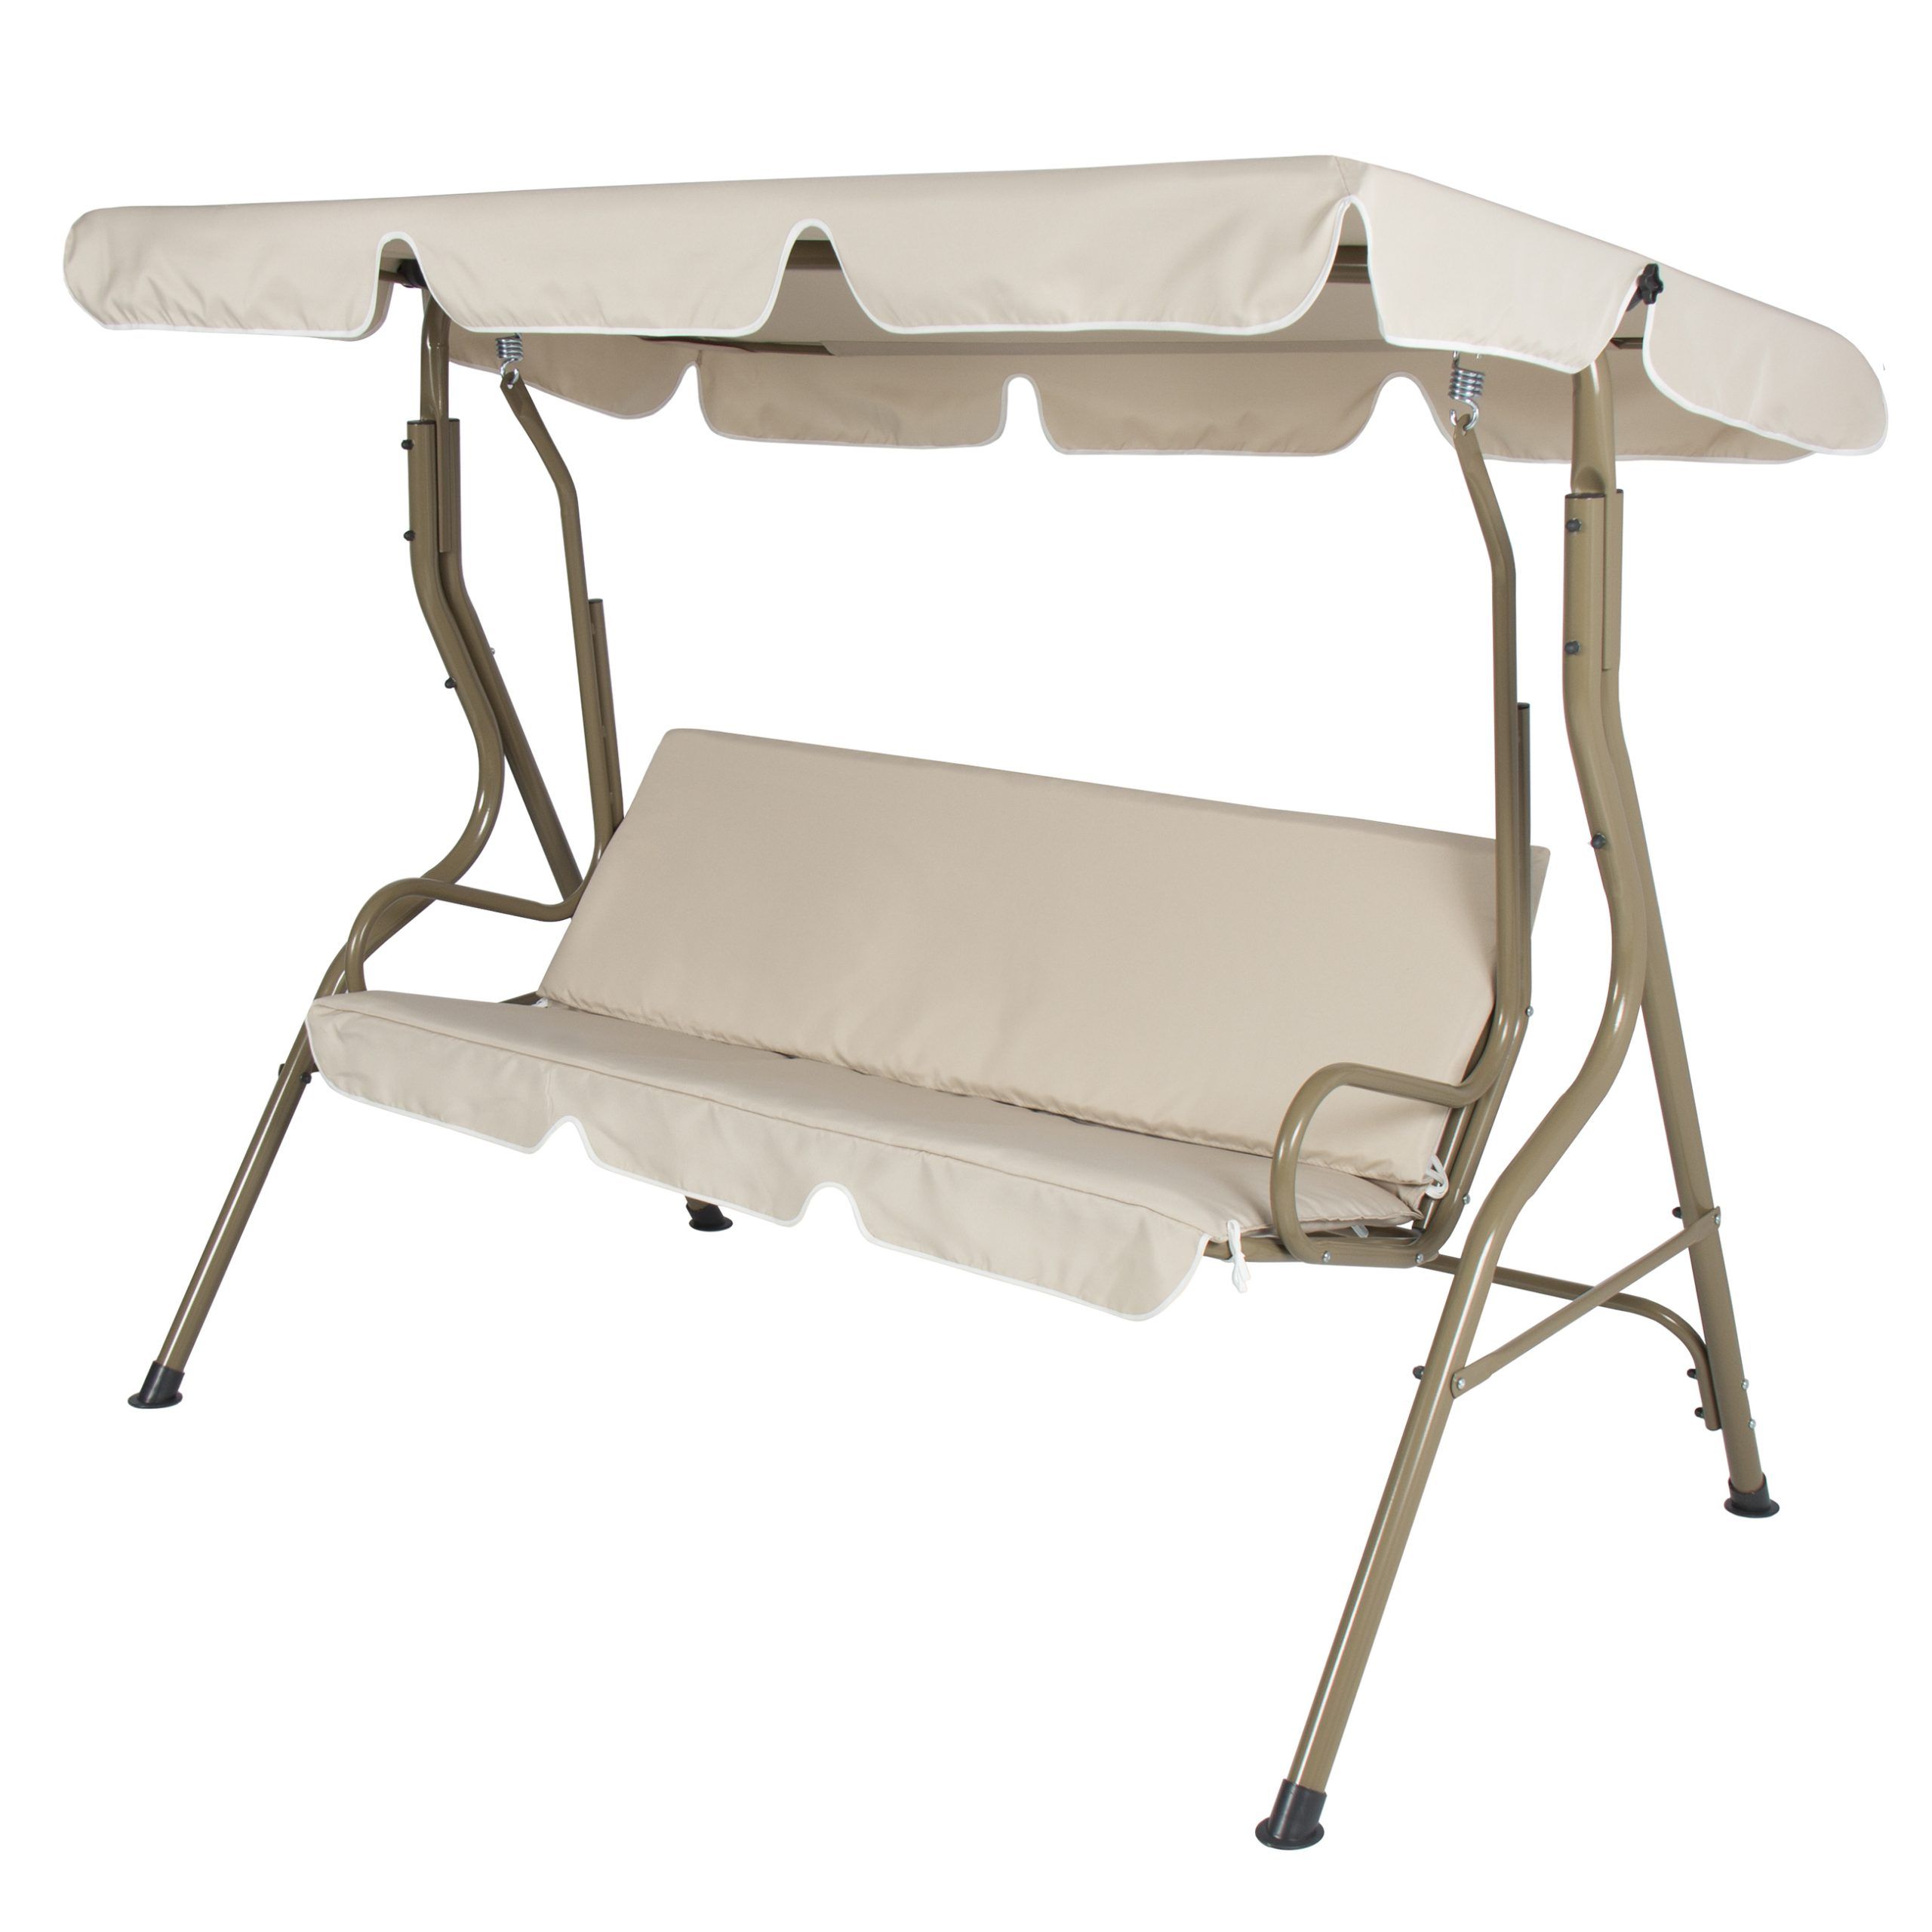 Most Recently Released Furniture: 2 Person Canopy Swing Porch Glider For Outdoor Regarding 2 Person Loveseat Chair Patio Porch Swings With Rocker (View 22 of 30)